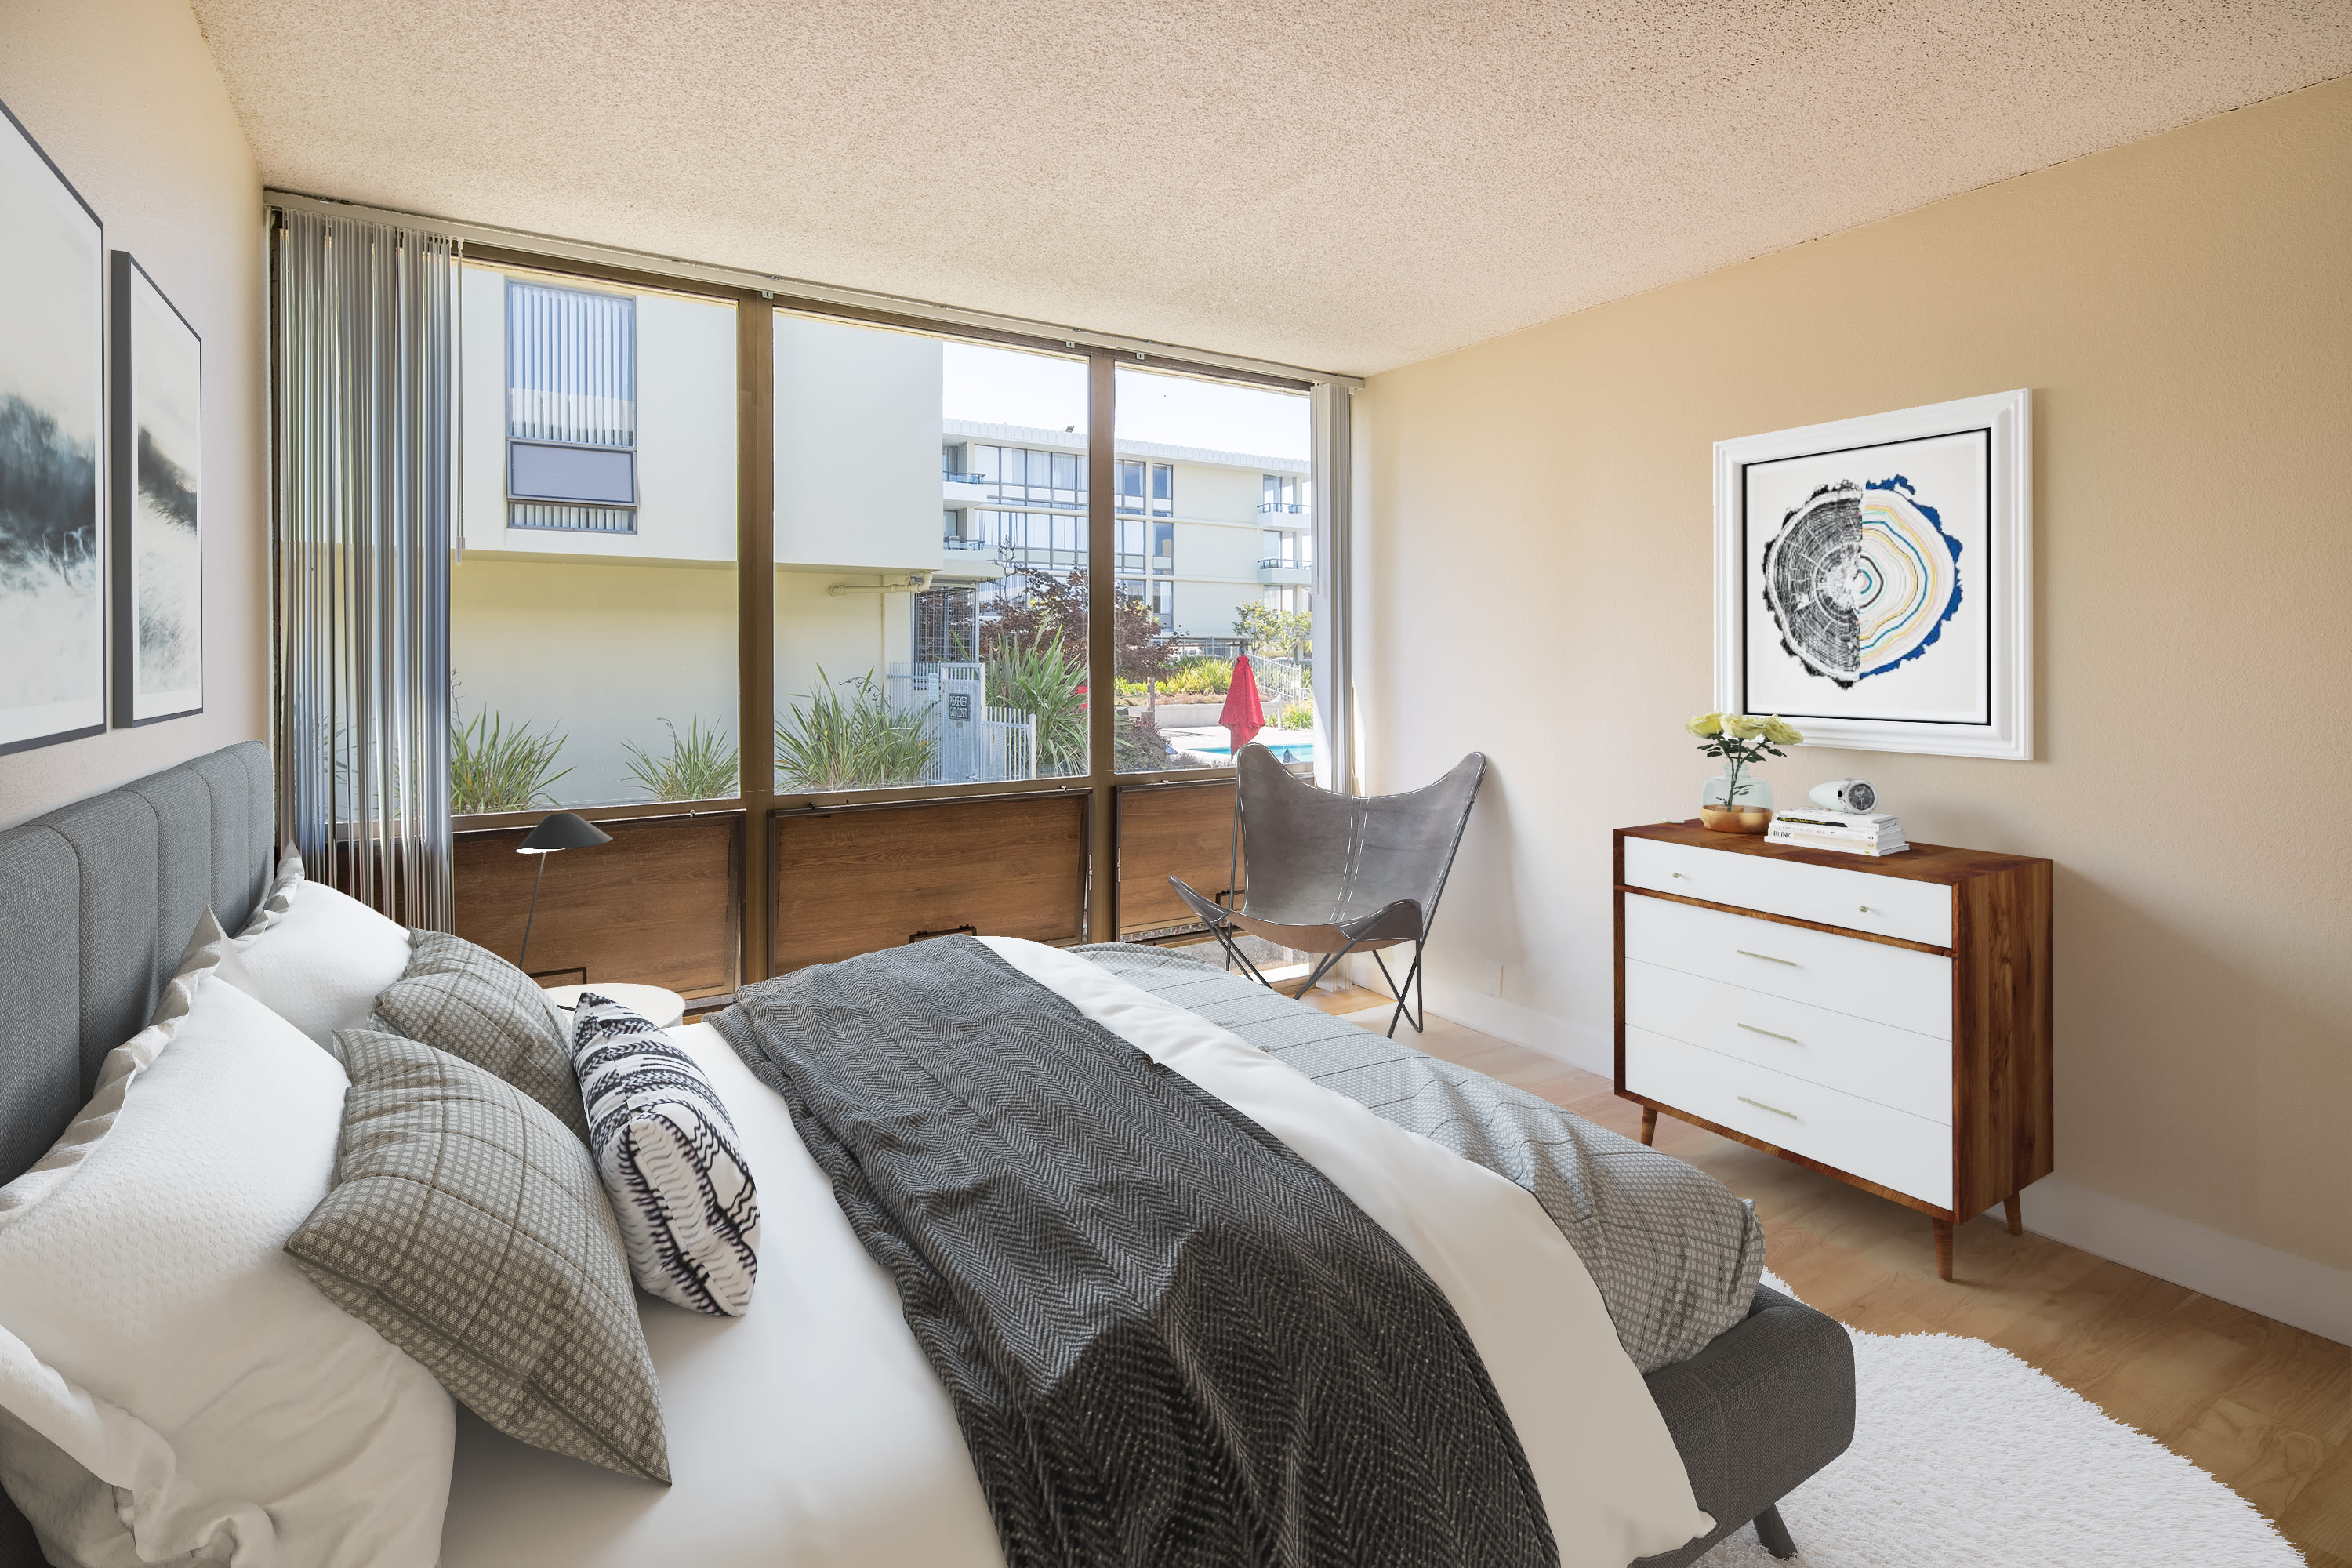 Large windows supply this bedroom at Skyline Terrace Apartments in Burlingame, California with lots of natural light 